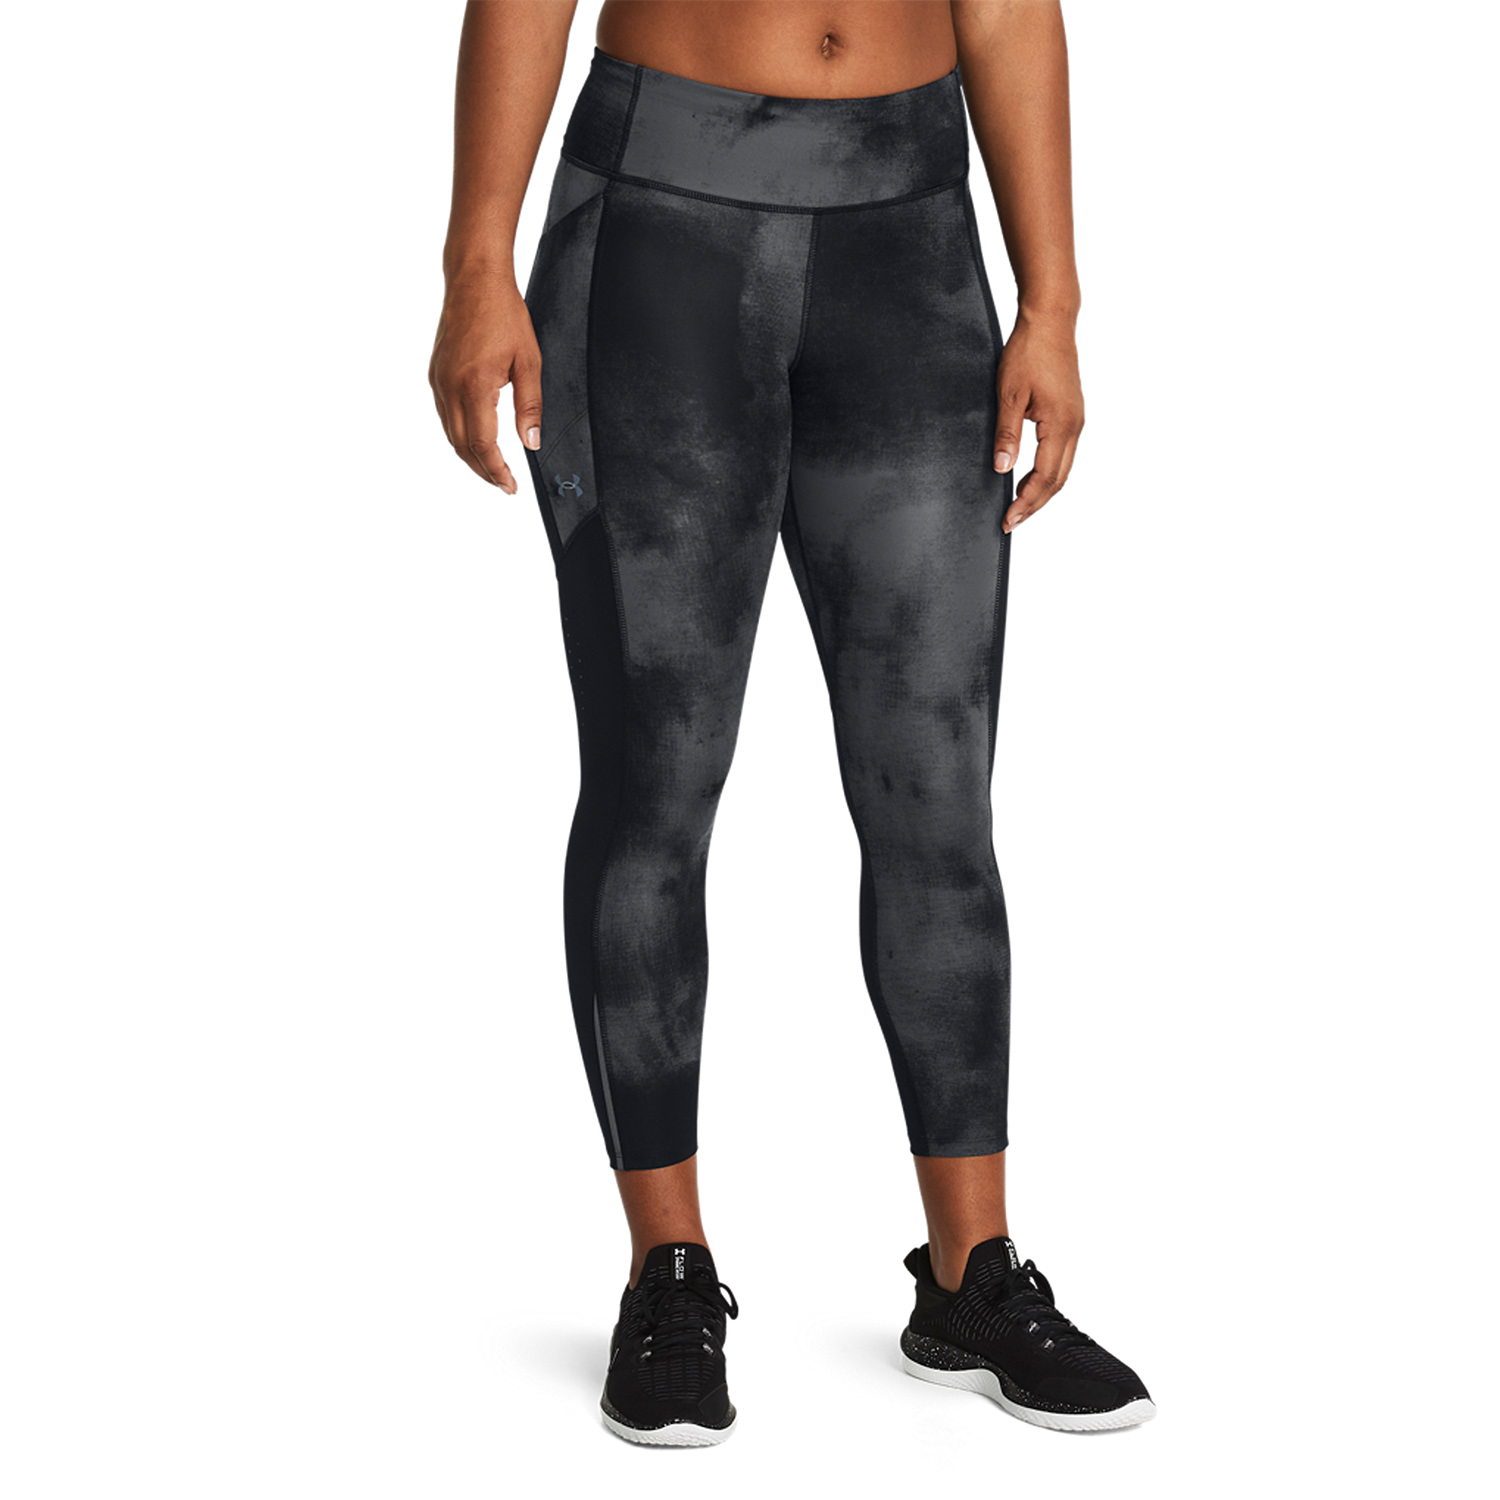 Under Armour Fly Fast Tights - Black/Reflective